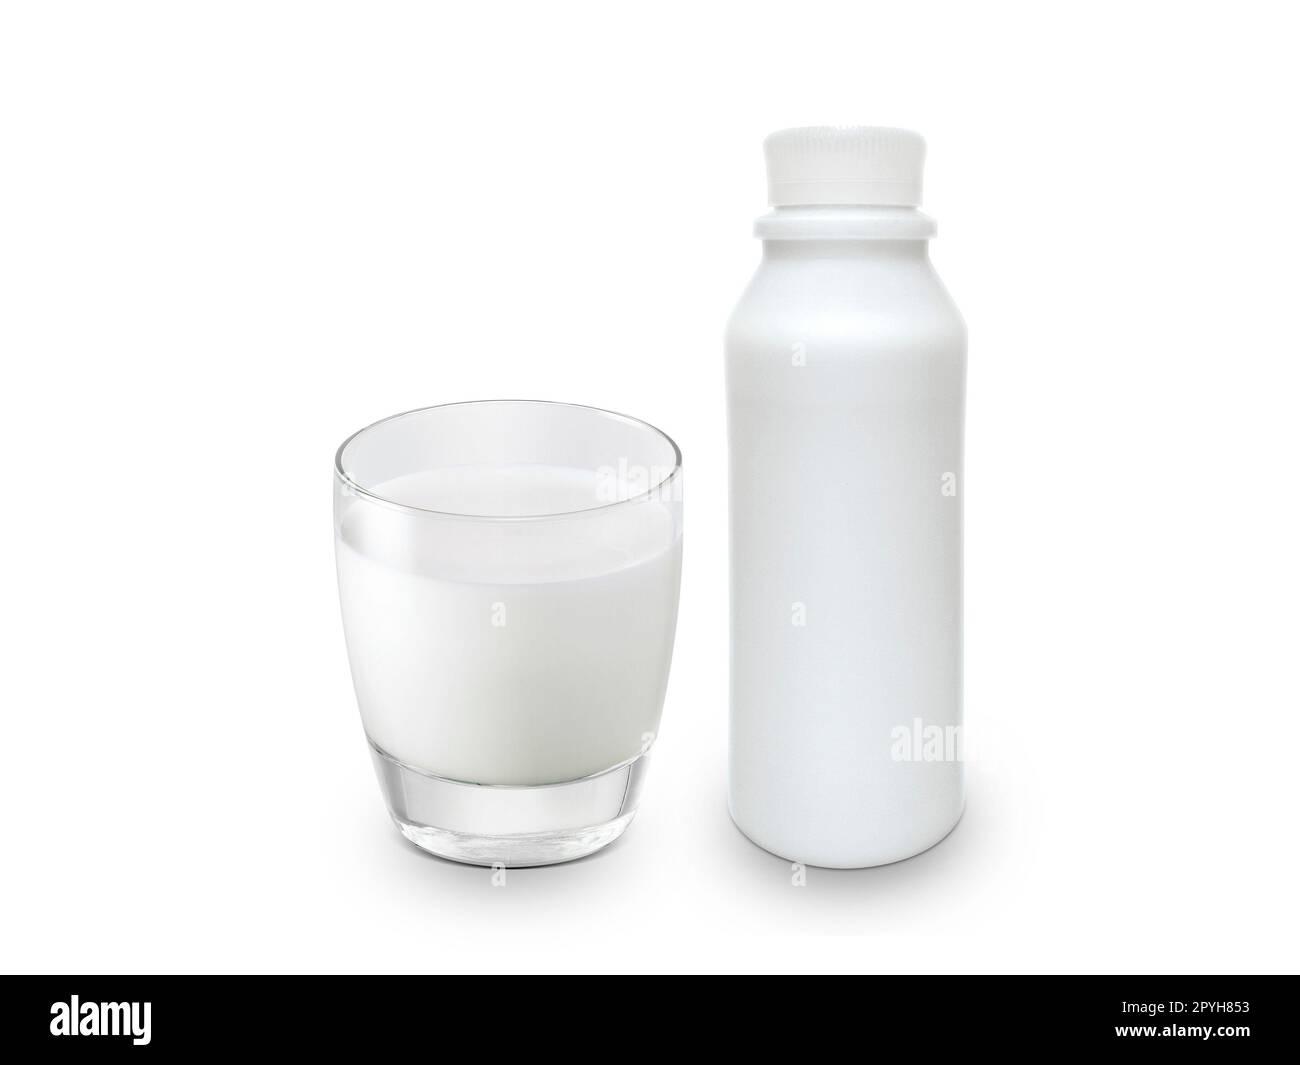 Glass of milk and milk bottle isolated on white background Stock Photo